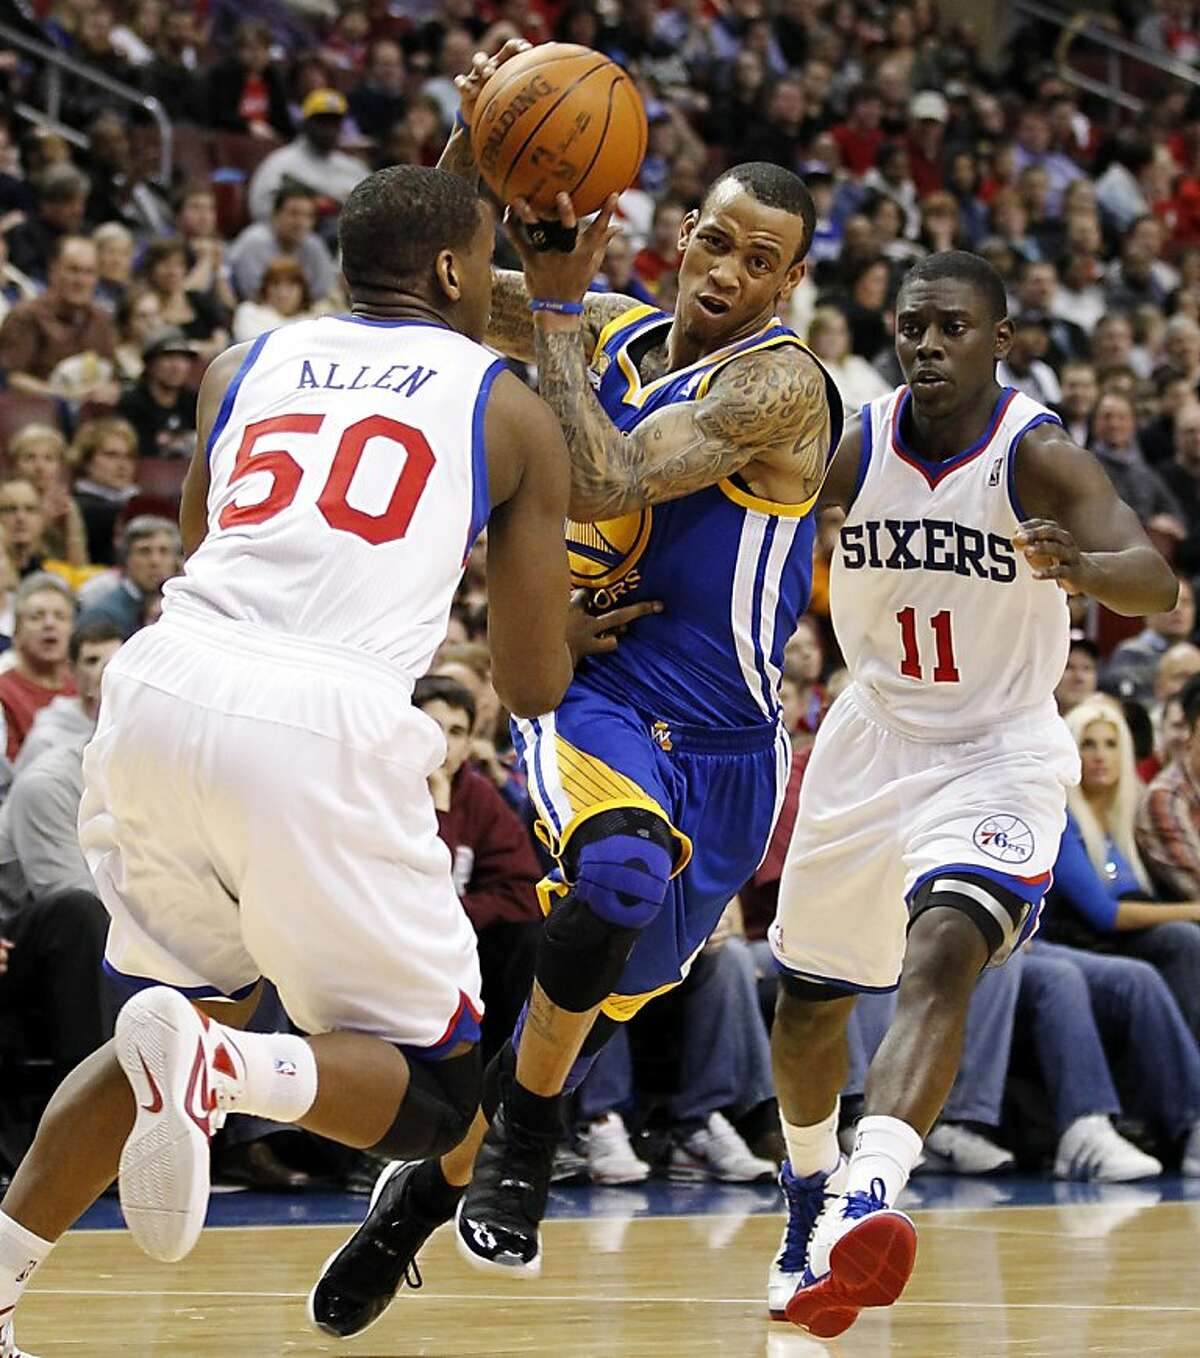 Philadelphia 76ers forward Lavoy Allen (50) and guard Jrue Holiday (11) pressure Golden State Warriors guard Monta Ellis (8) in the first half of an NBA basketball game, Friday, March 2, 2012, in Philadelphia.